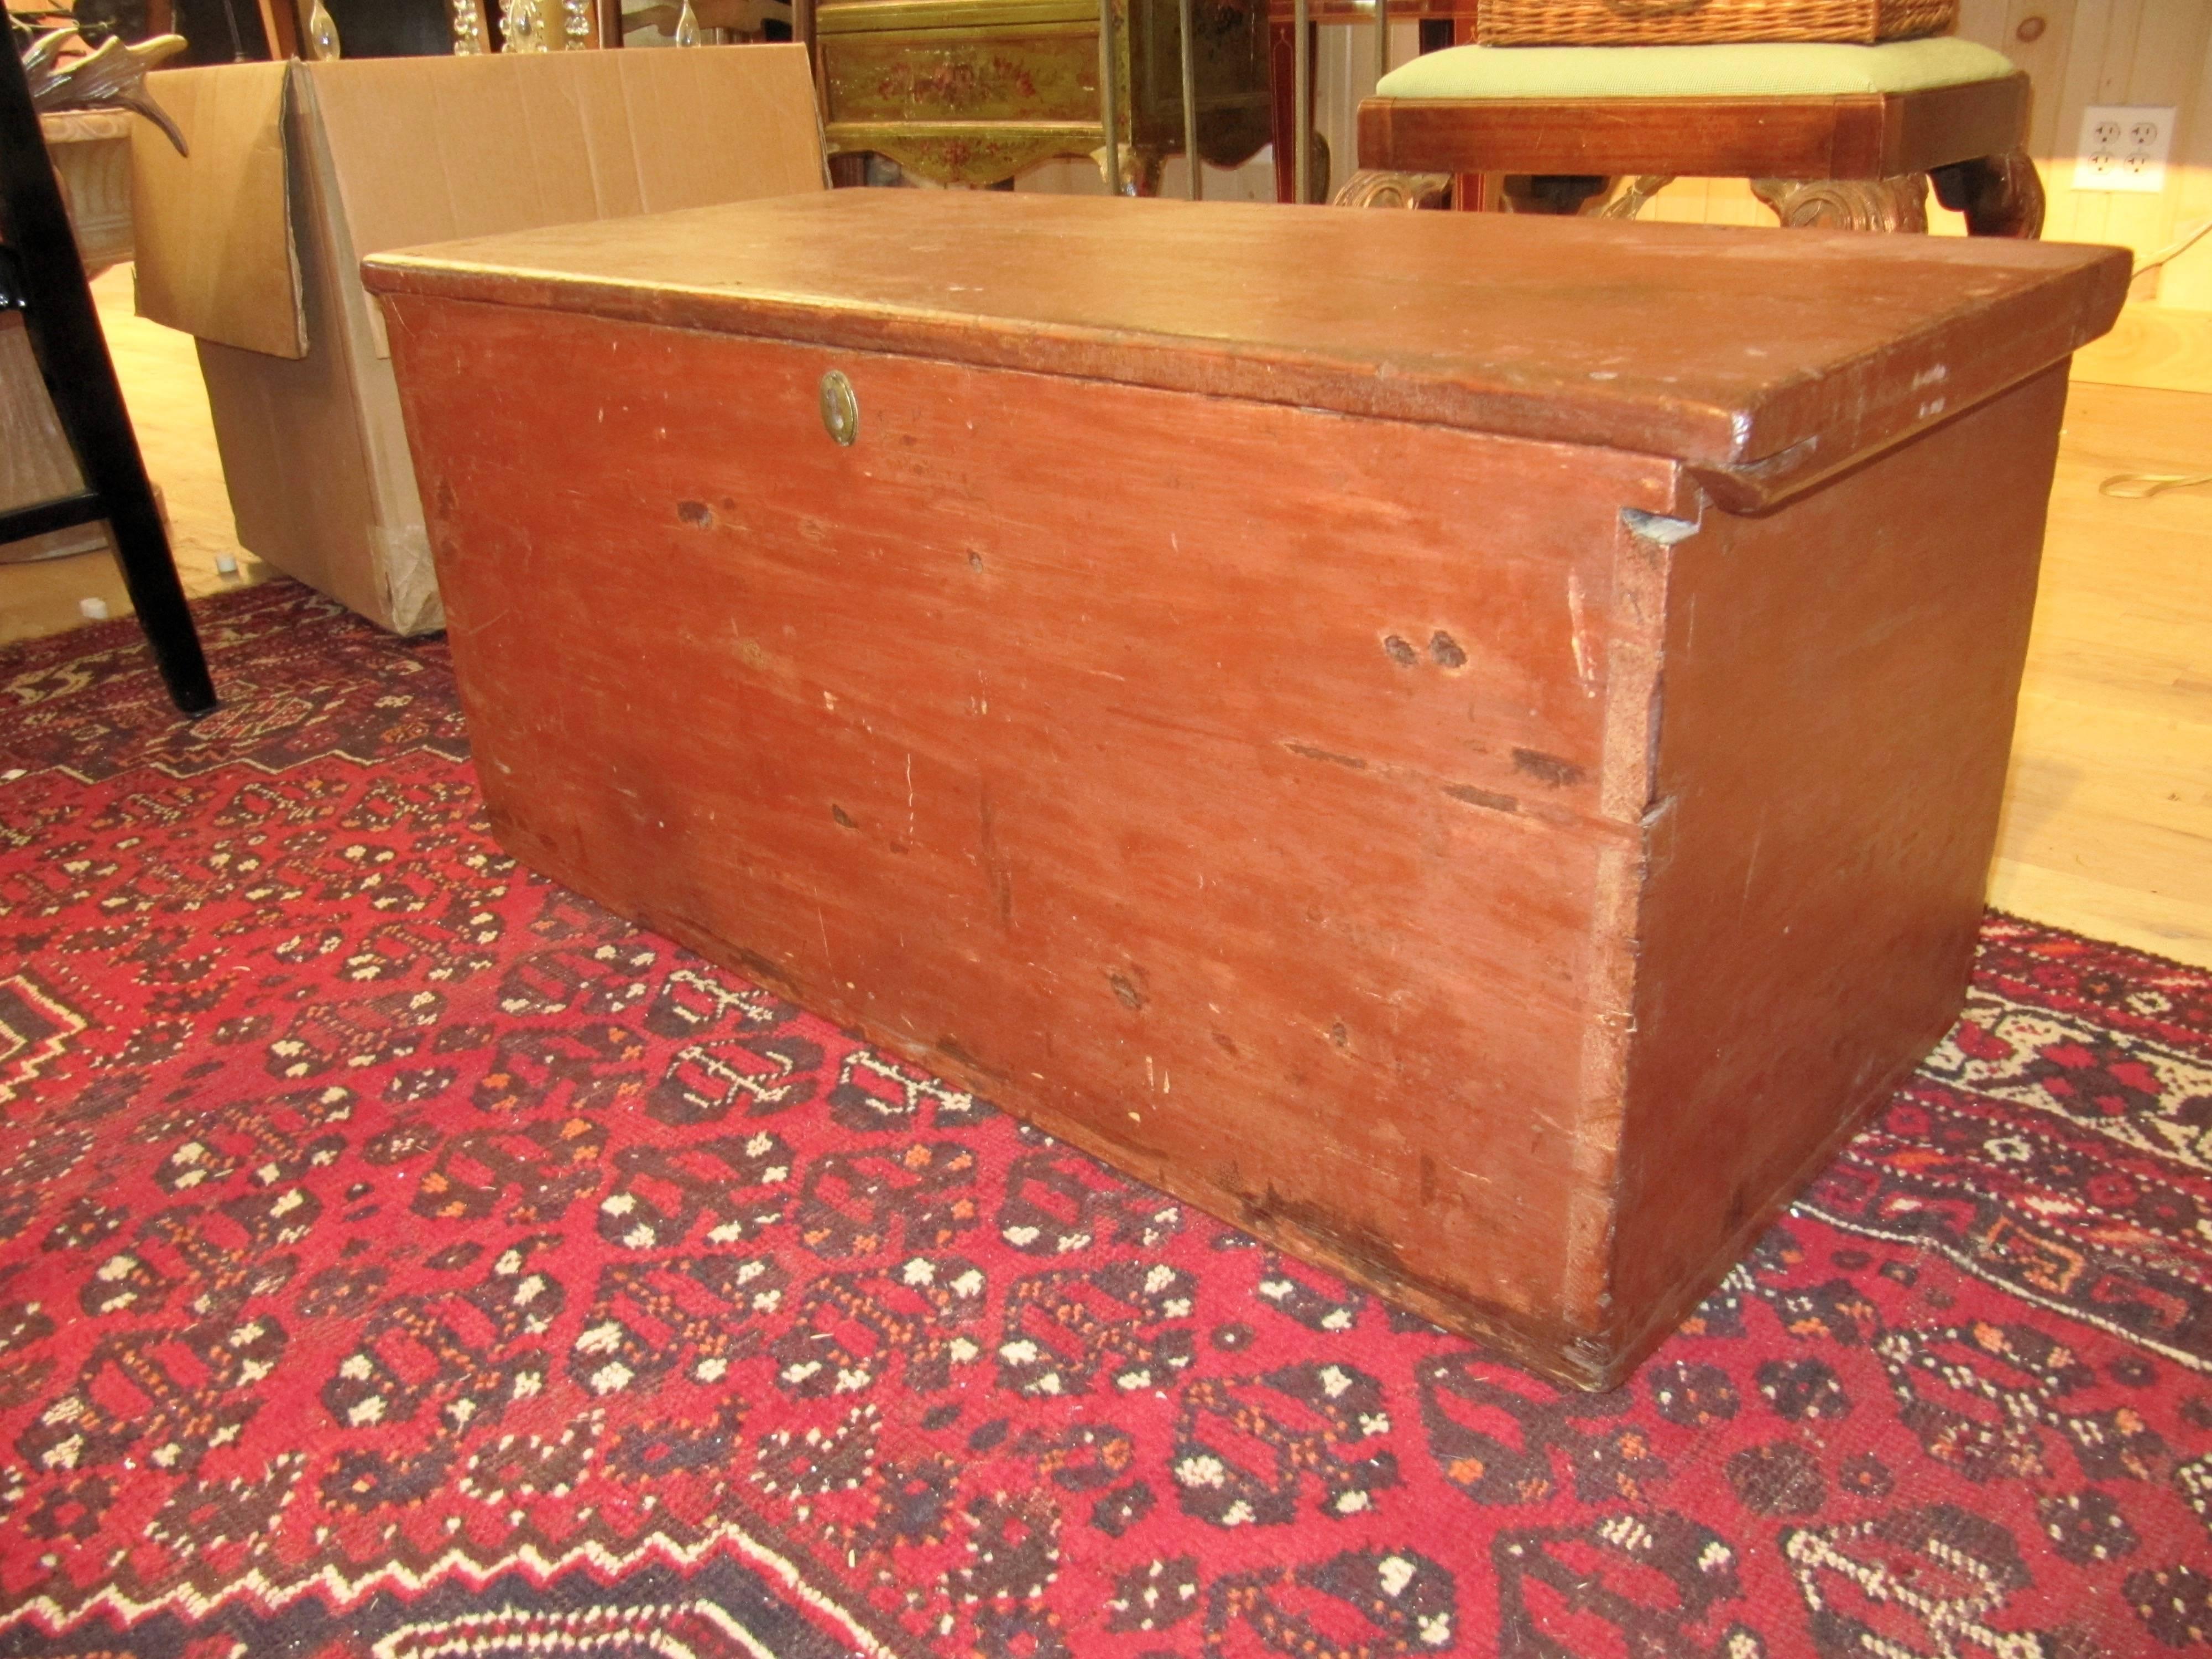 Handsome 19th century American painted trunk with lovely worn painted finish
having a rectangular lift top over the conforming case fitted with a single drawer. 
Measures: Height 16 1/4 x width 36 x depth 15 1/4 inches.